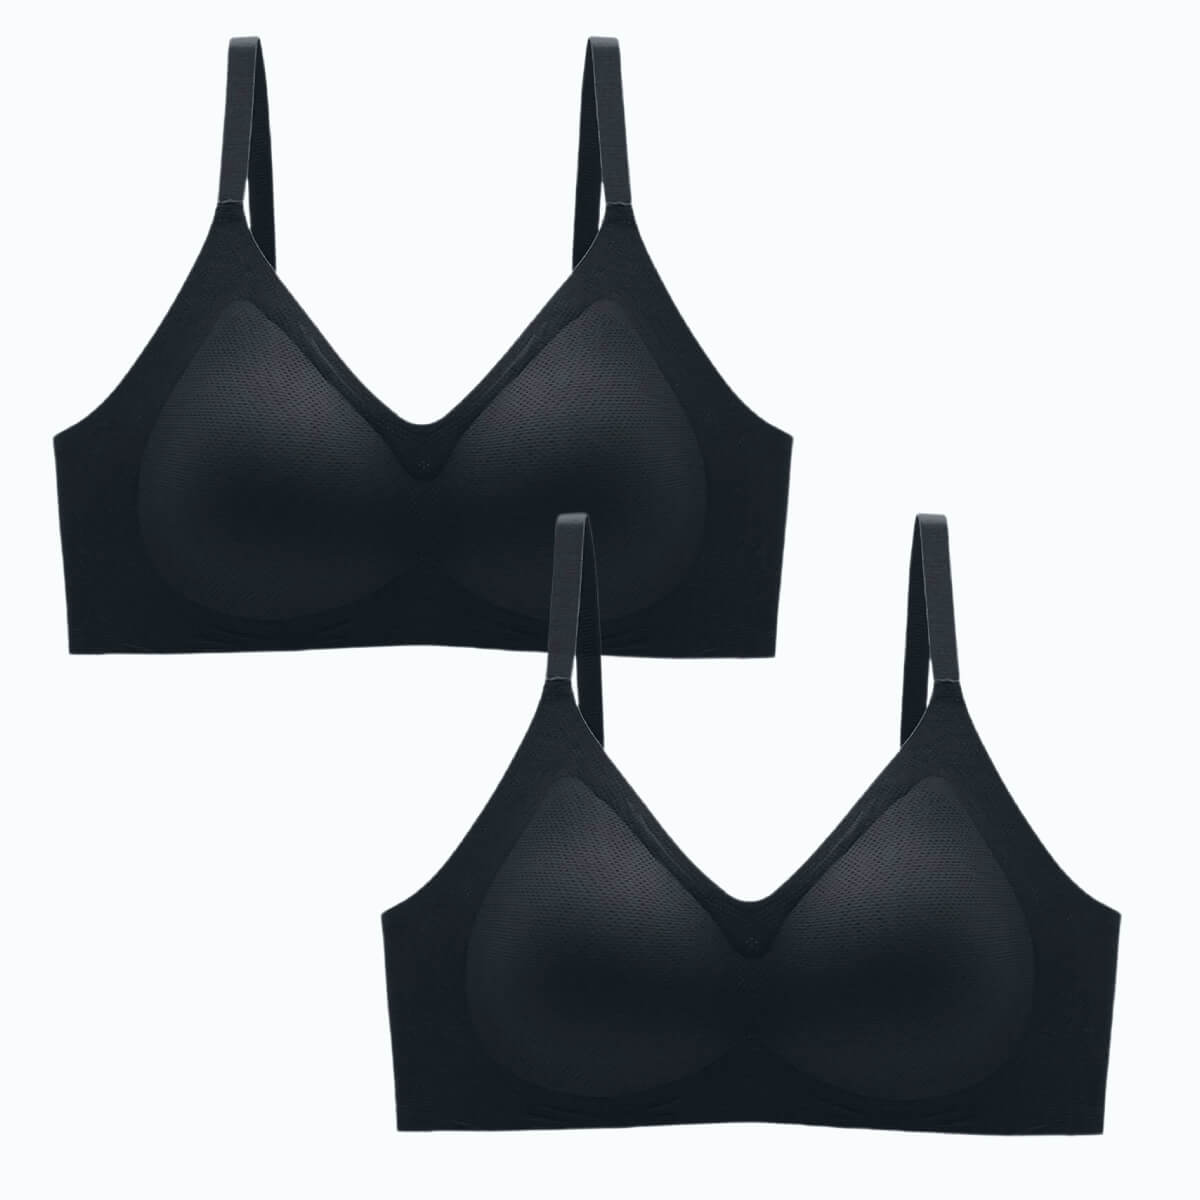 Struggle to figure out your bra size? Fret not, our bra fit guide